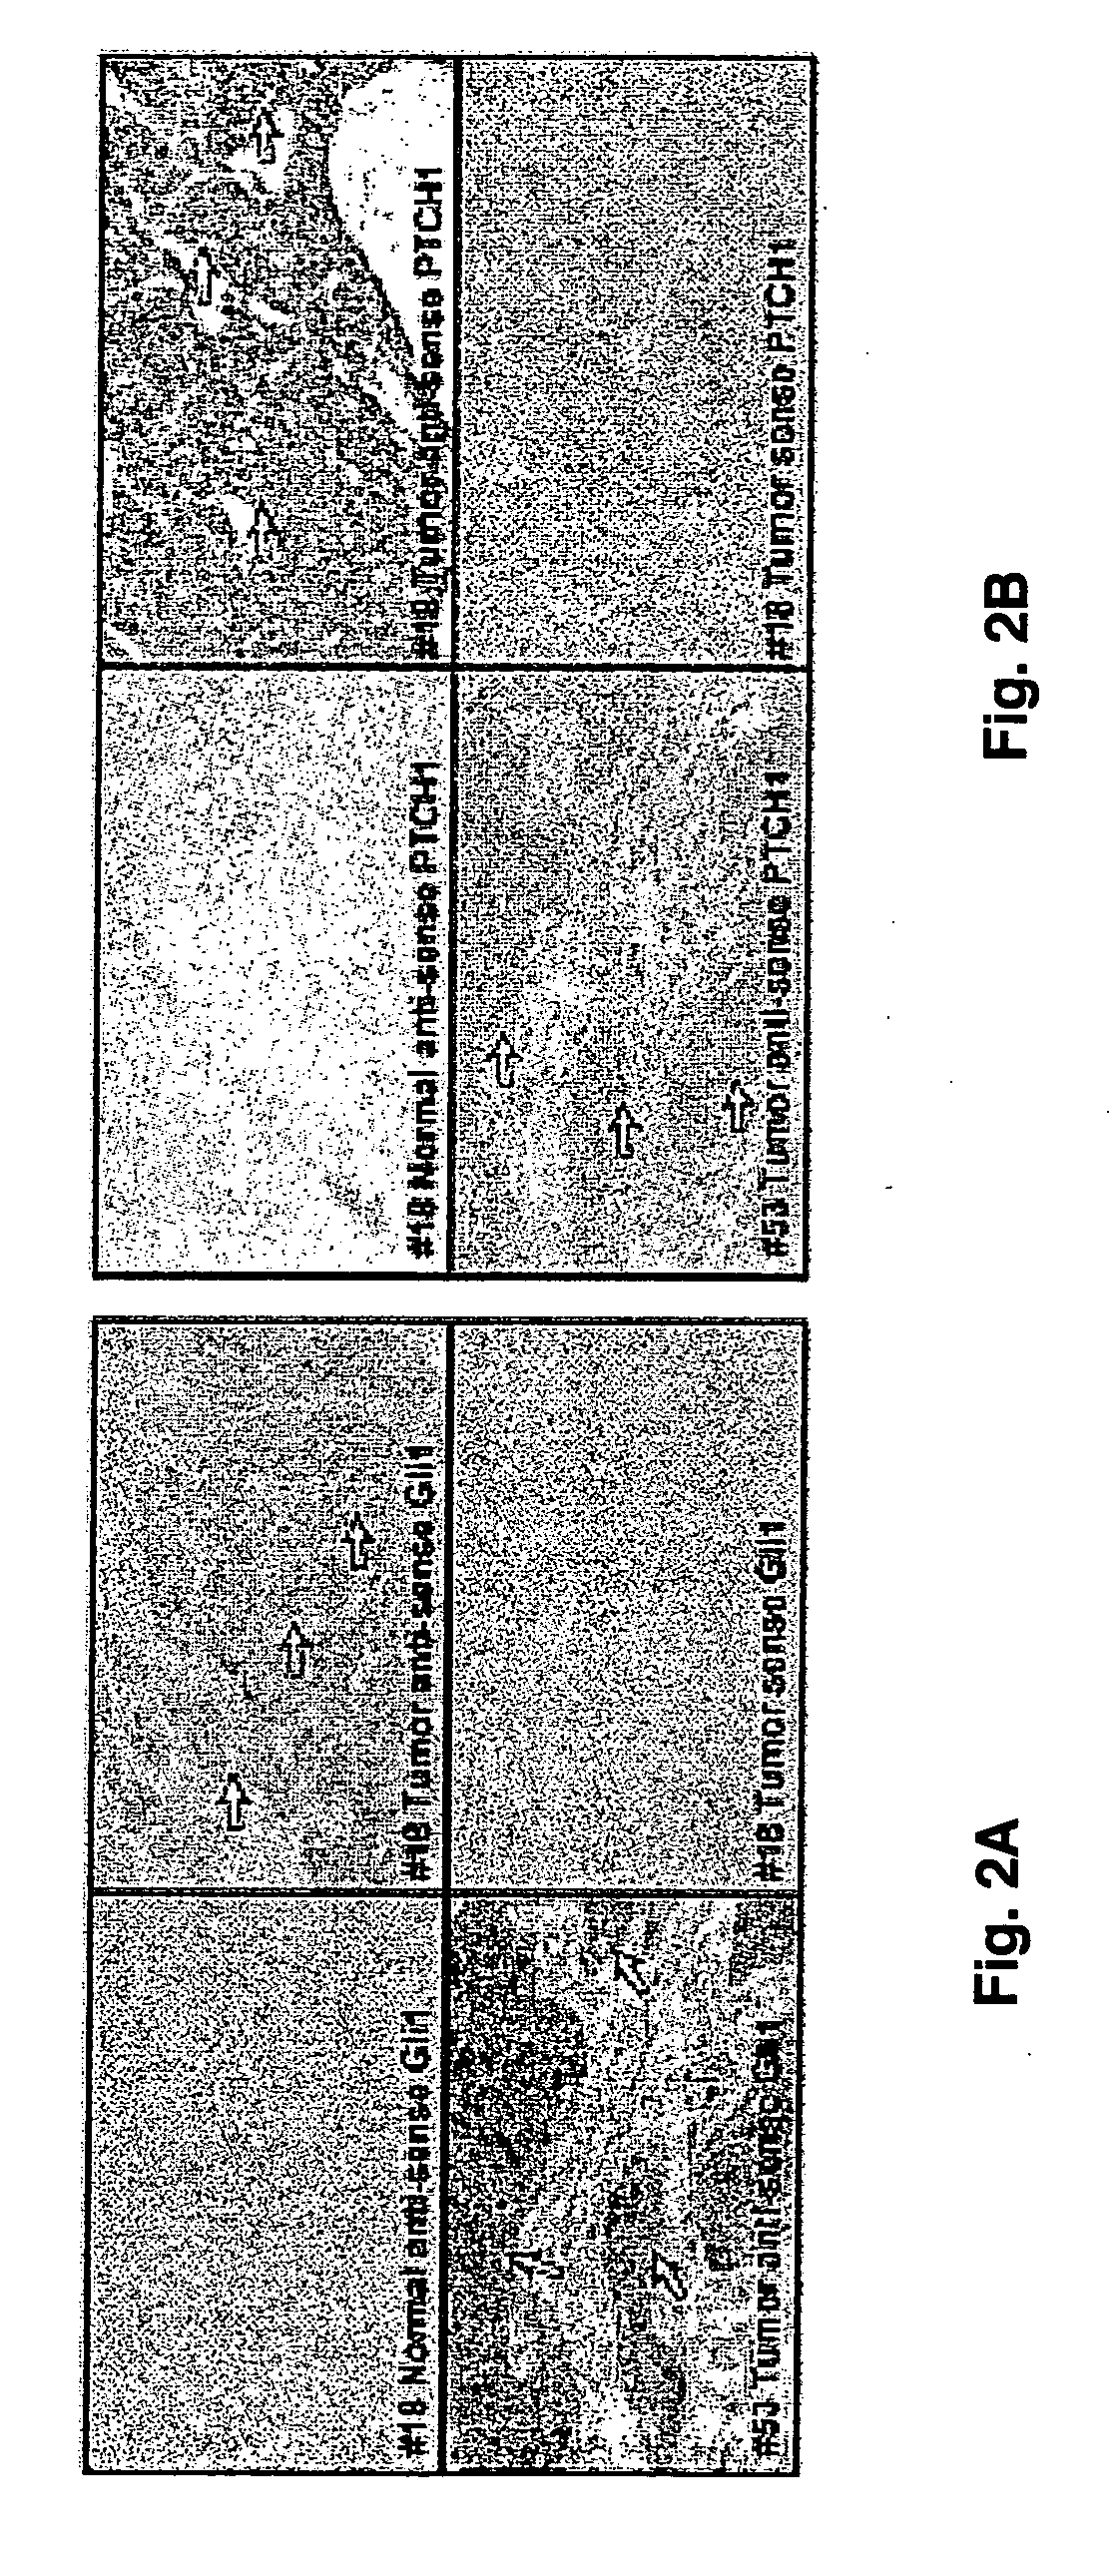 Regulation of the hedgehog signaling pathway and uses thereof